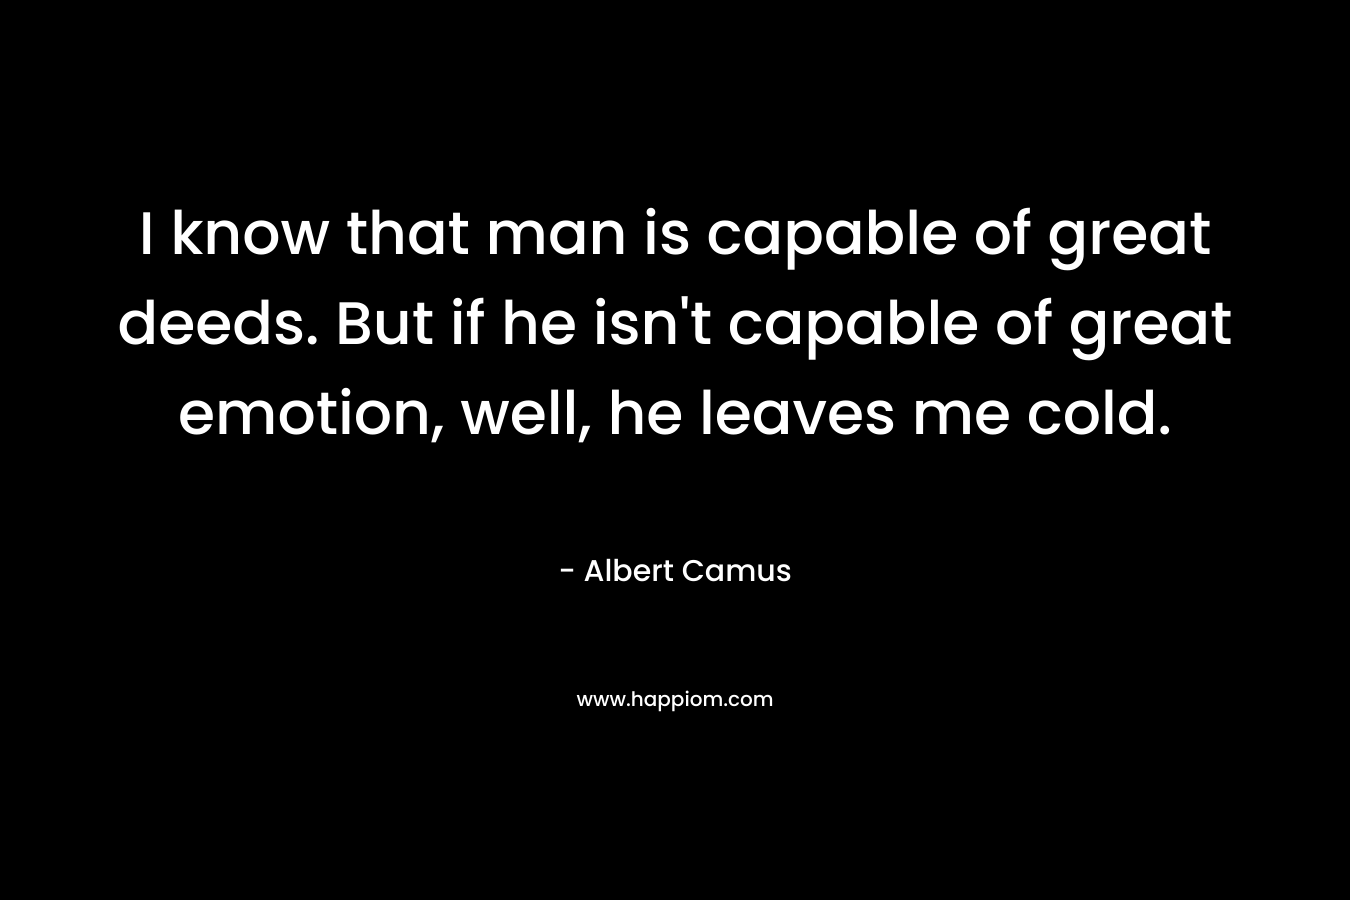 I know that man is capable of great deeds. But if he isn’t capable of great emotion, well, he leaves me cold. – Albert Camus